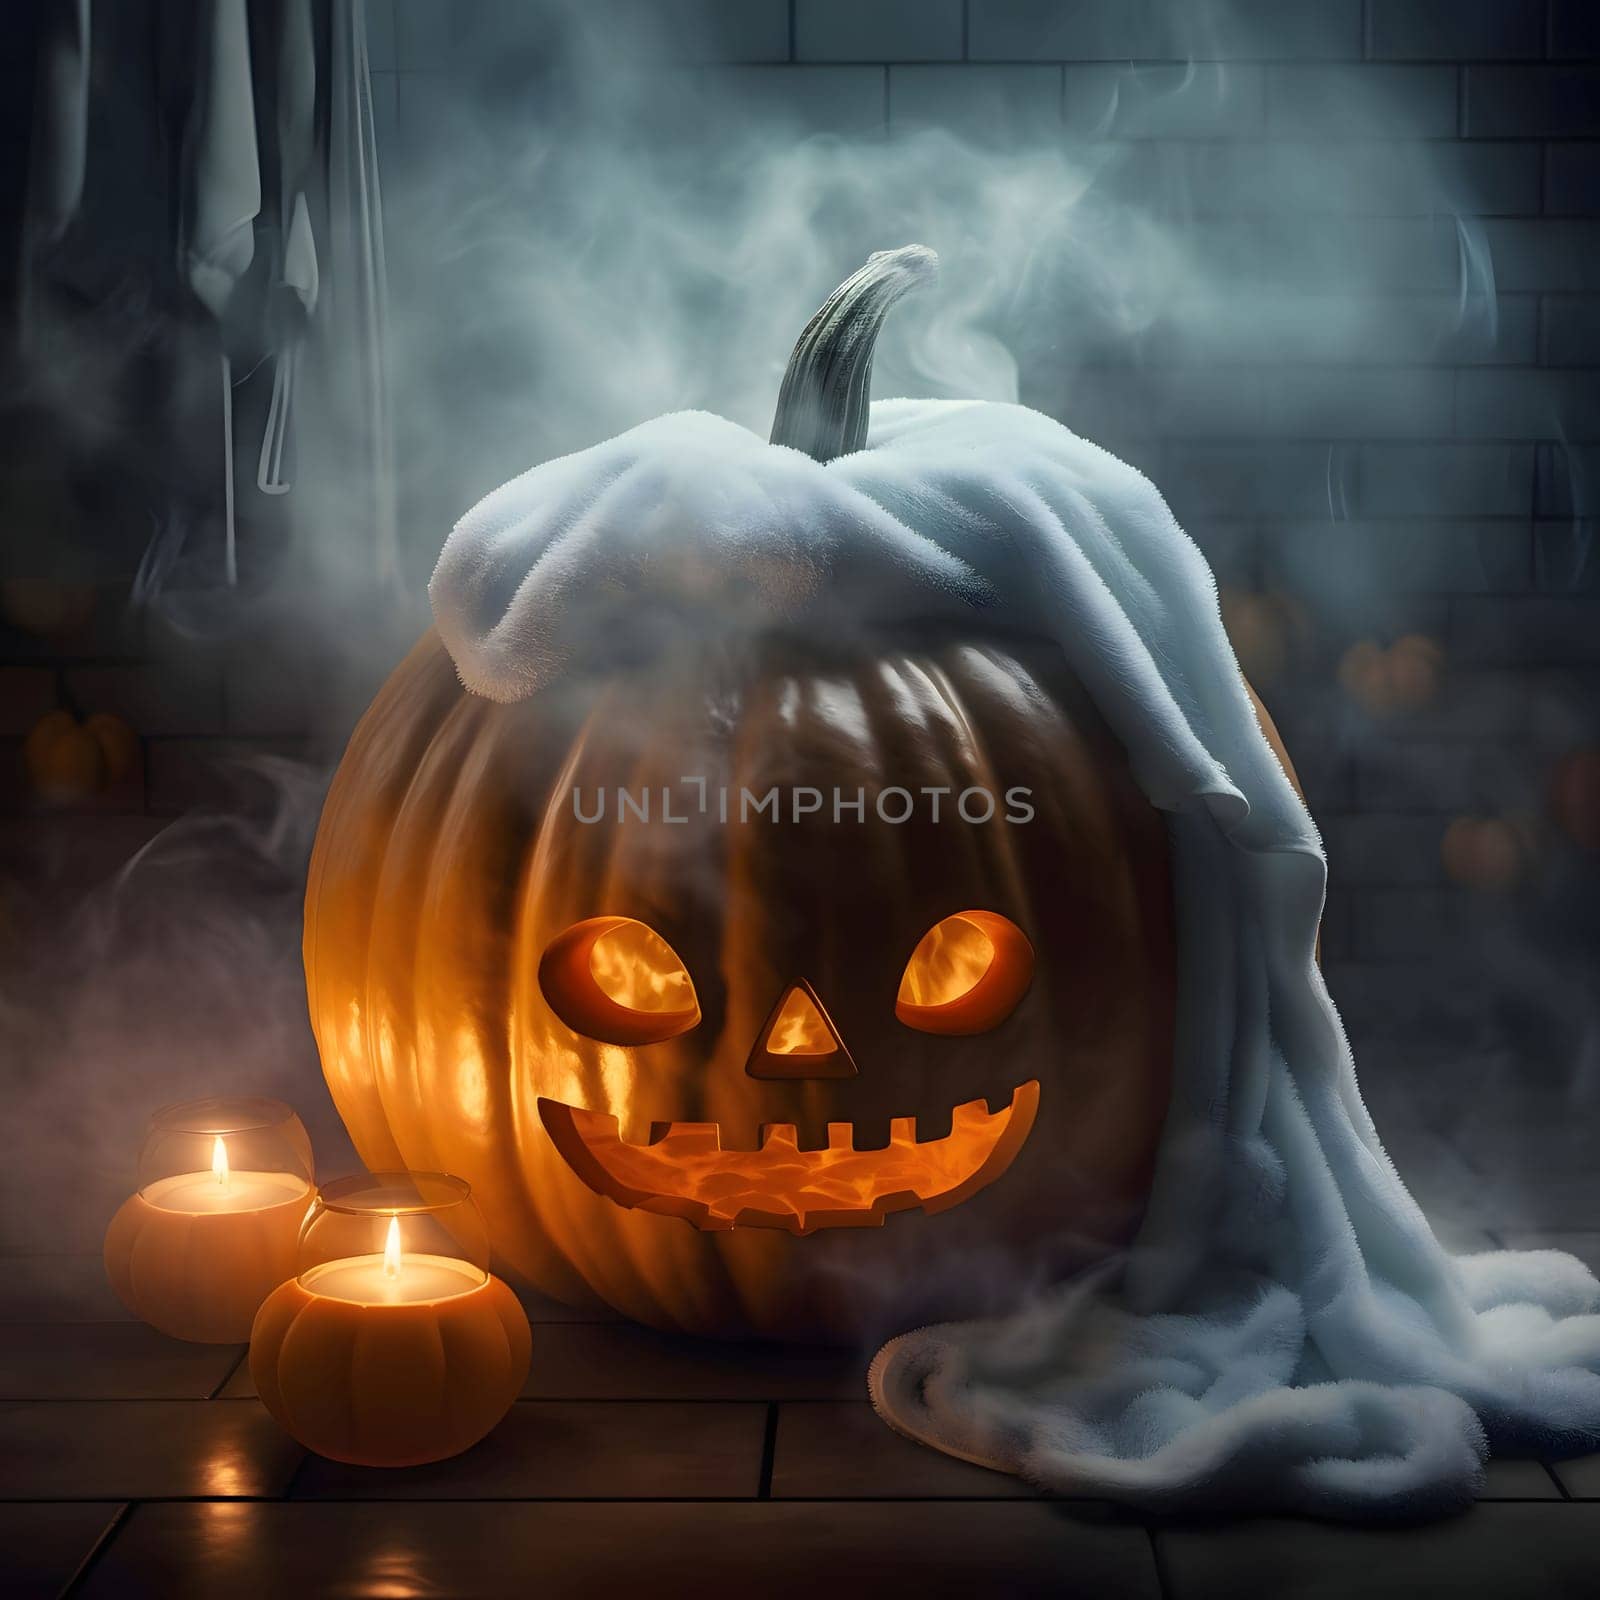 Dark pumpkin with towel smoke all around, glowing pumpkin candles, a Halloween image. Atmosphere of darkness and fear.